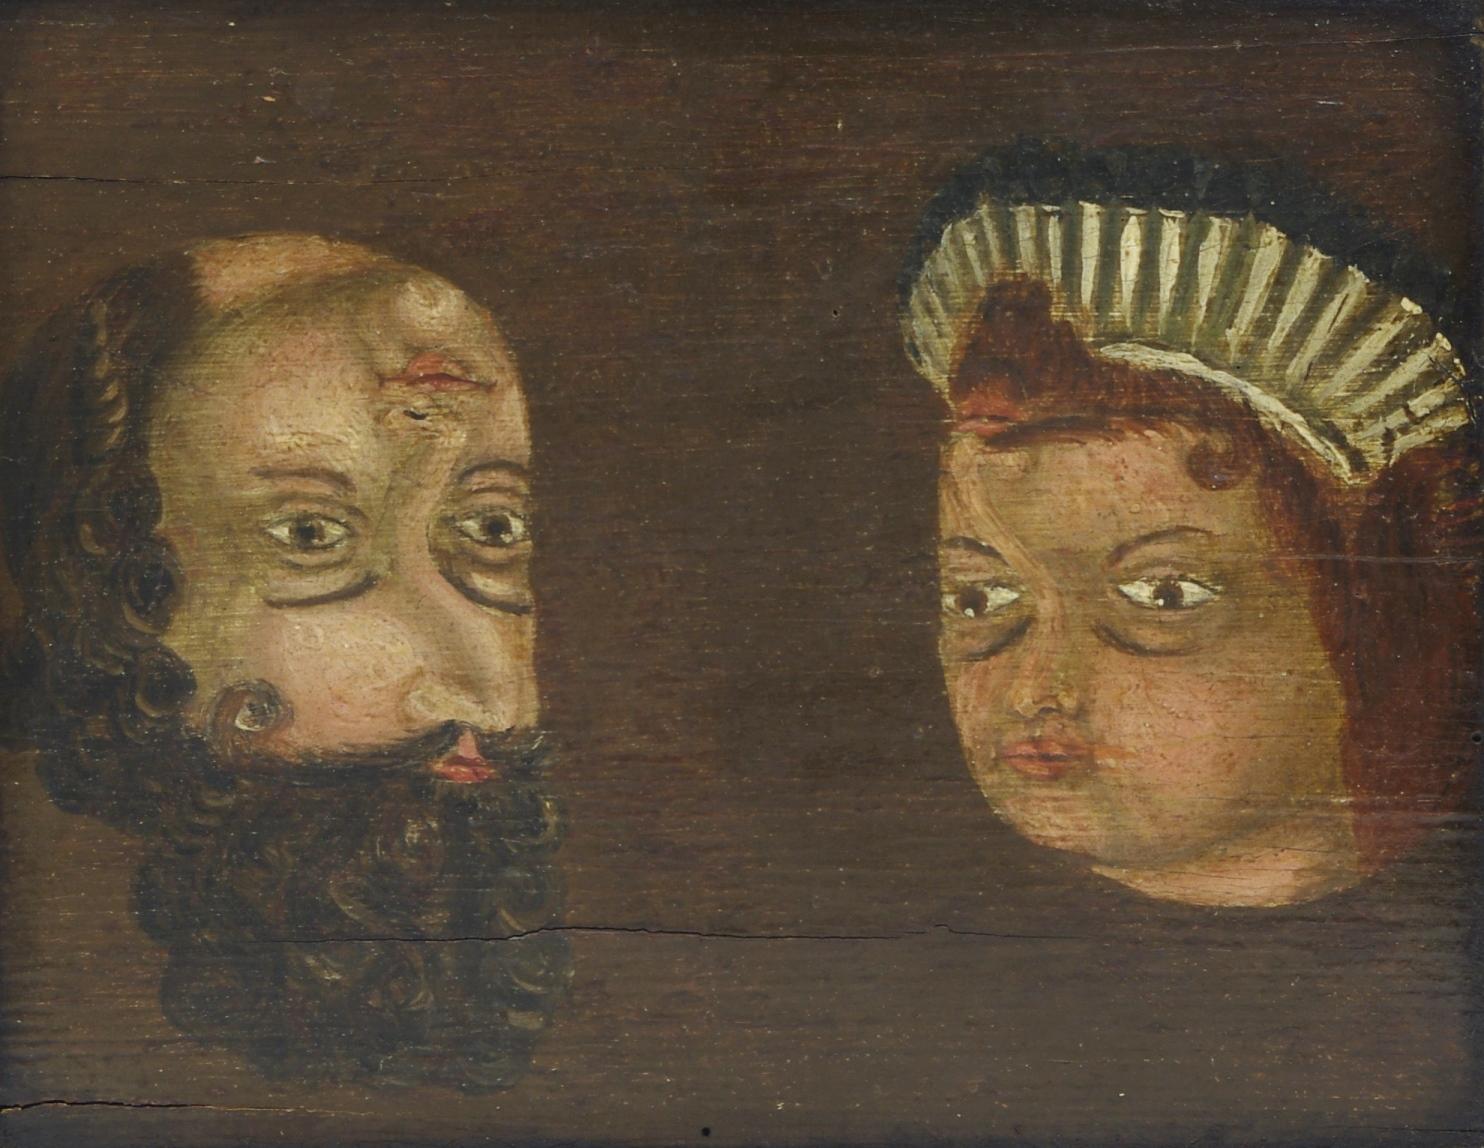 Folk Art trompe l'oeil reversible double portrait, oil on board depicting a man on the left and a woman on the right; when reversed a different man and woman appear; the wormy panel attached to the frame with wrought iron nails. (See